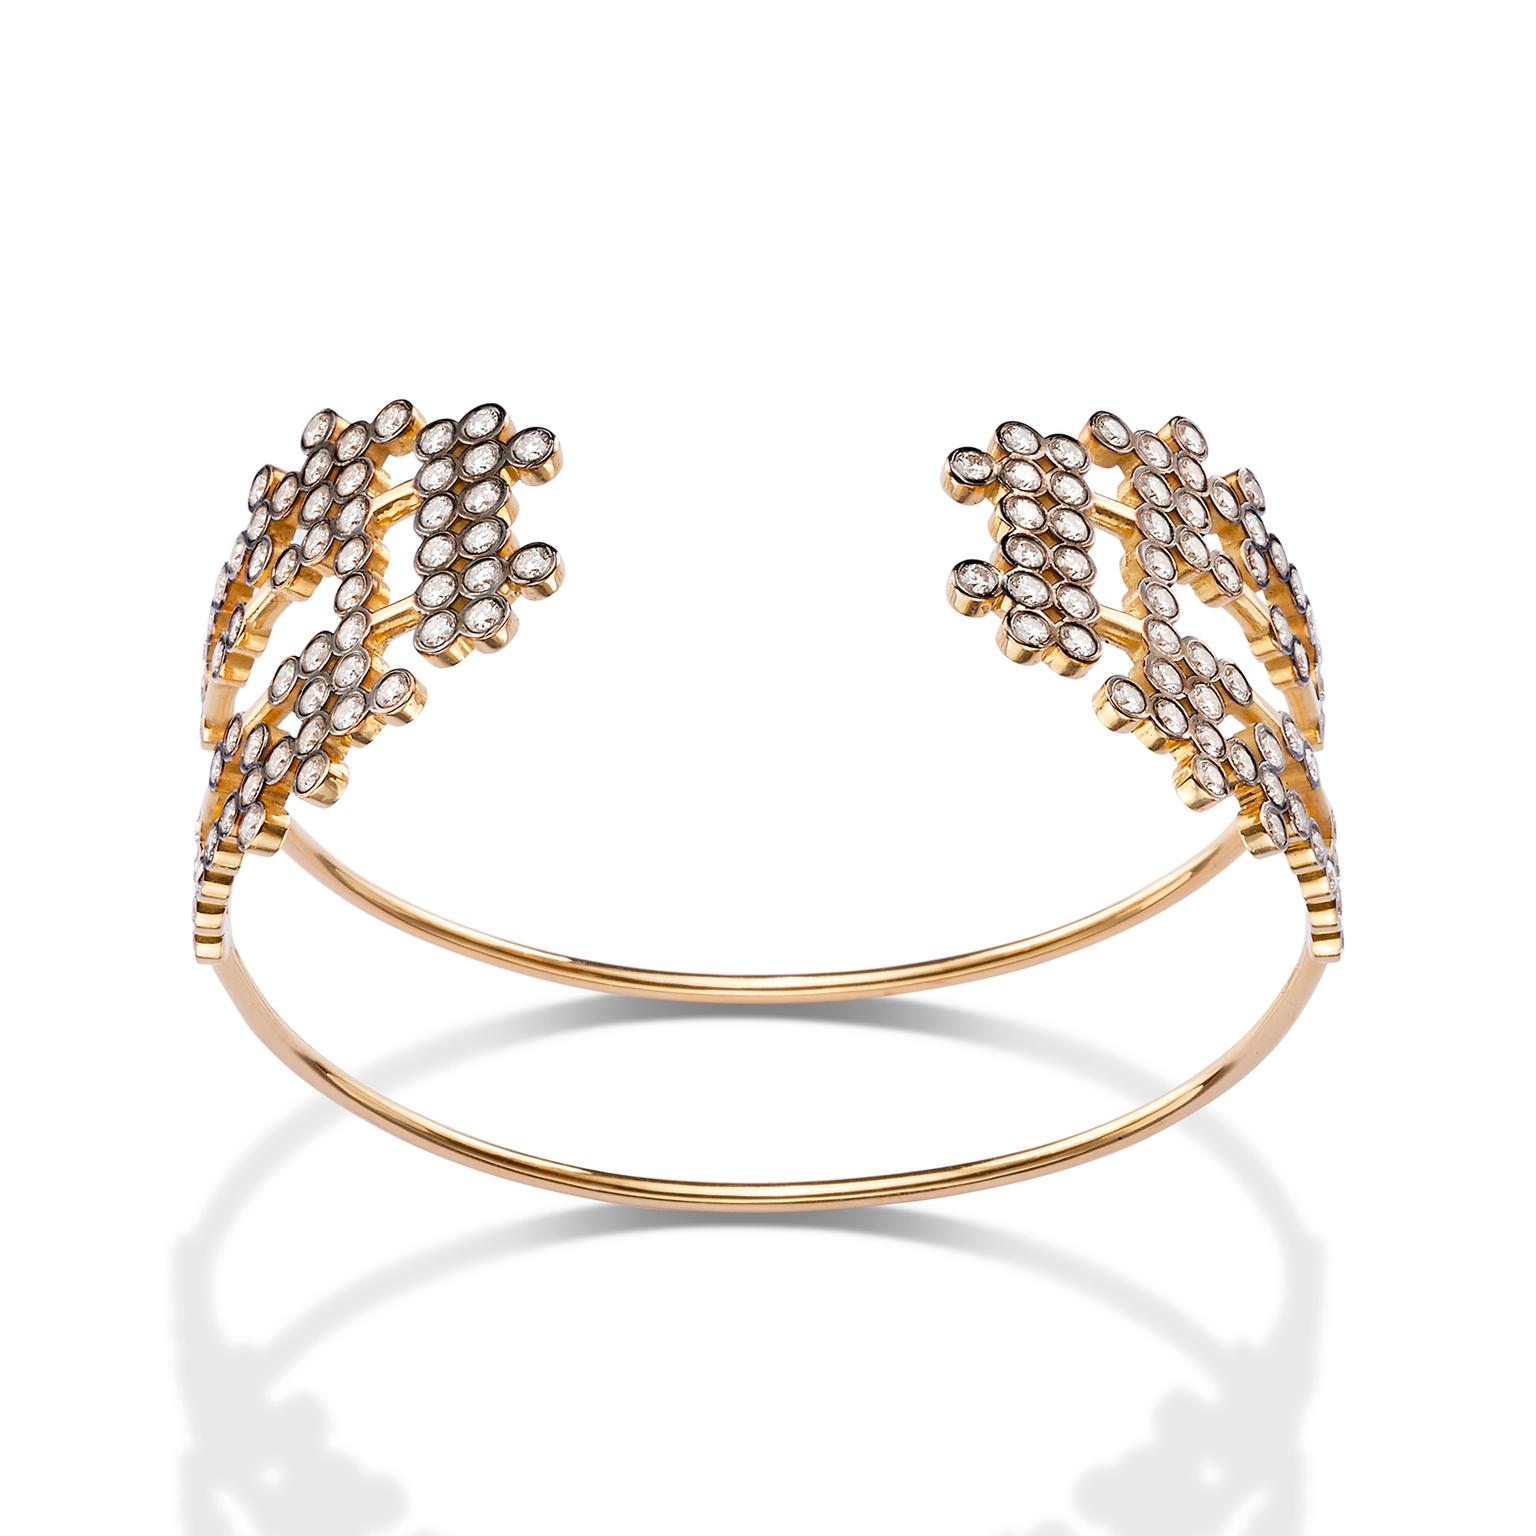 The up-and-coming jewellery brands